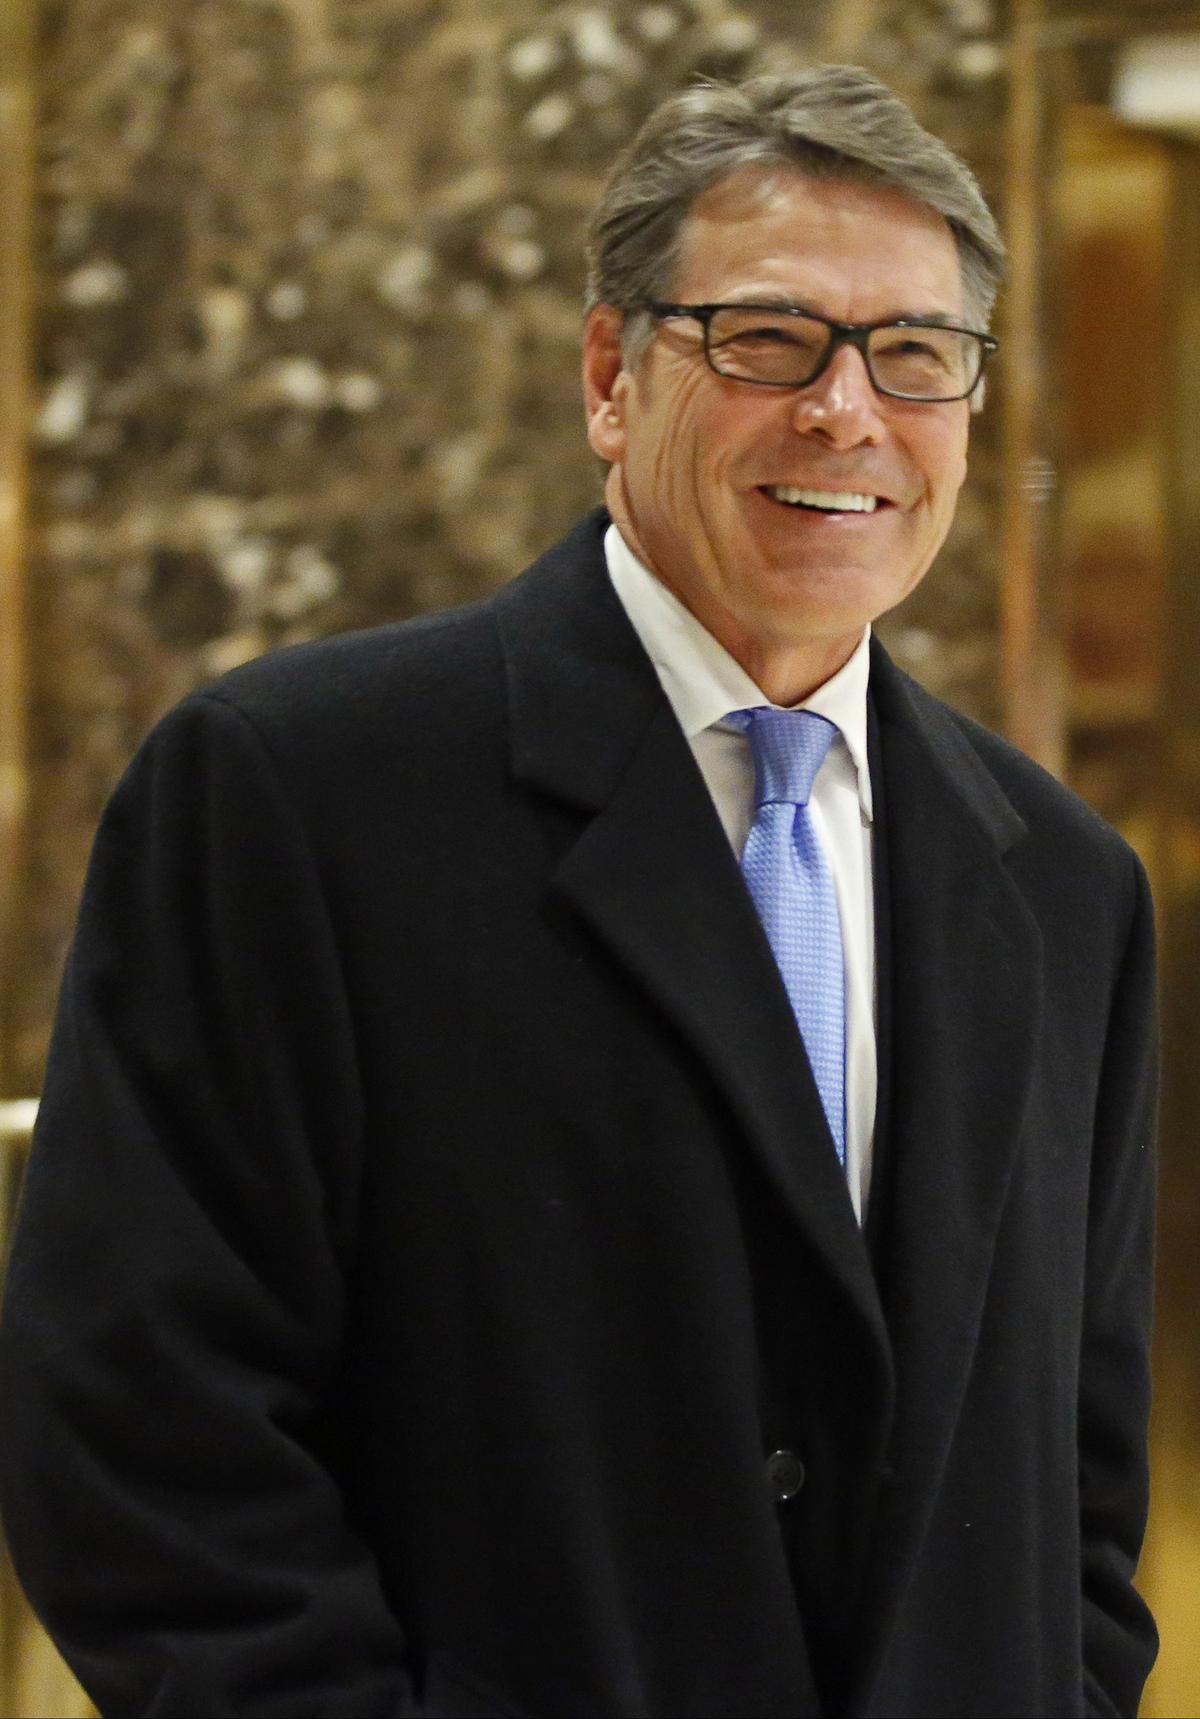 Former Texas Gov. Rick Perry smiles as he leaves Trump Tower in New York on Dec. 12, 2016. (AP Photo/Kathy Willens)